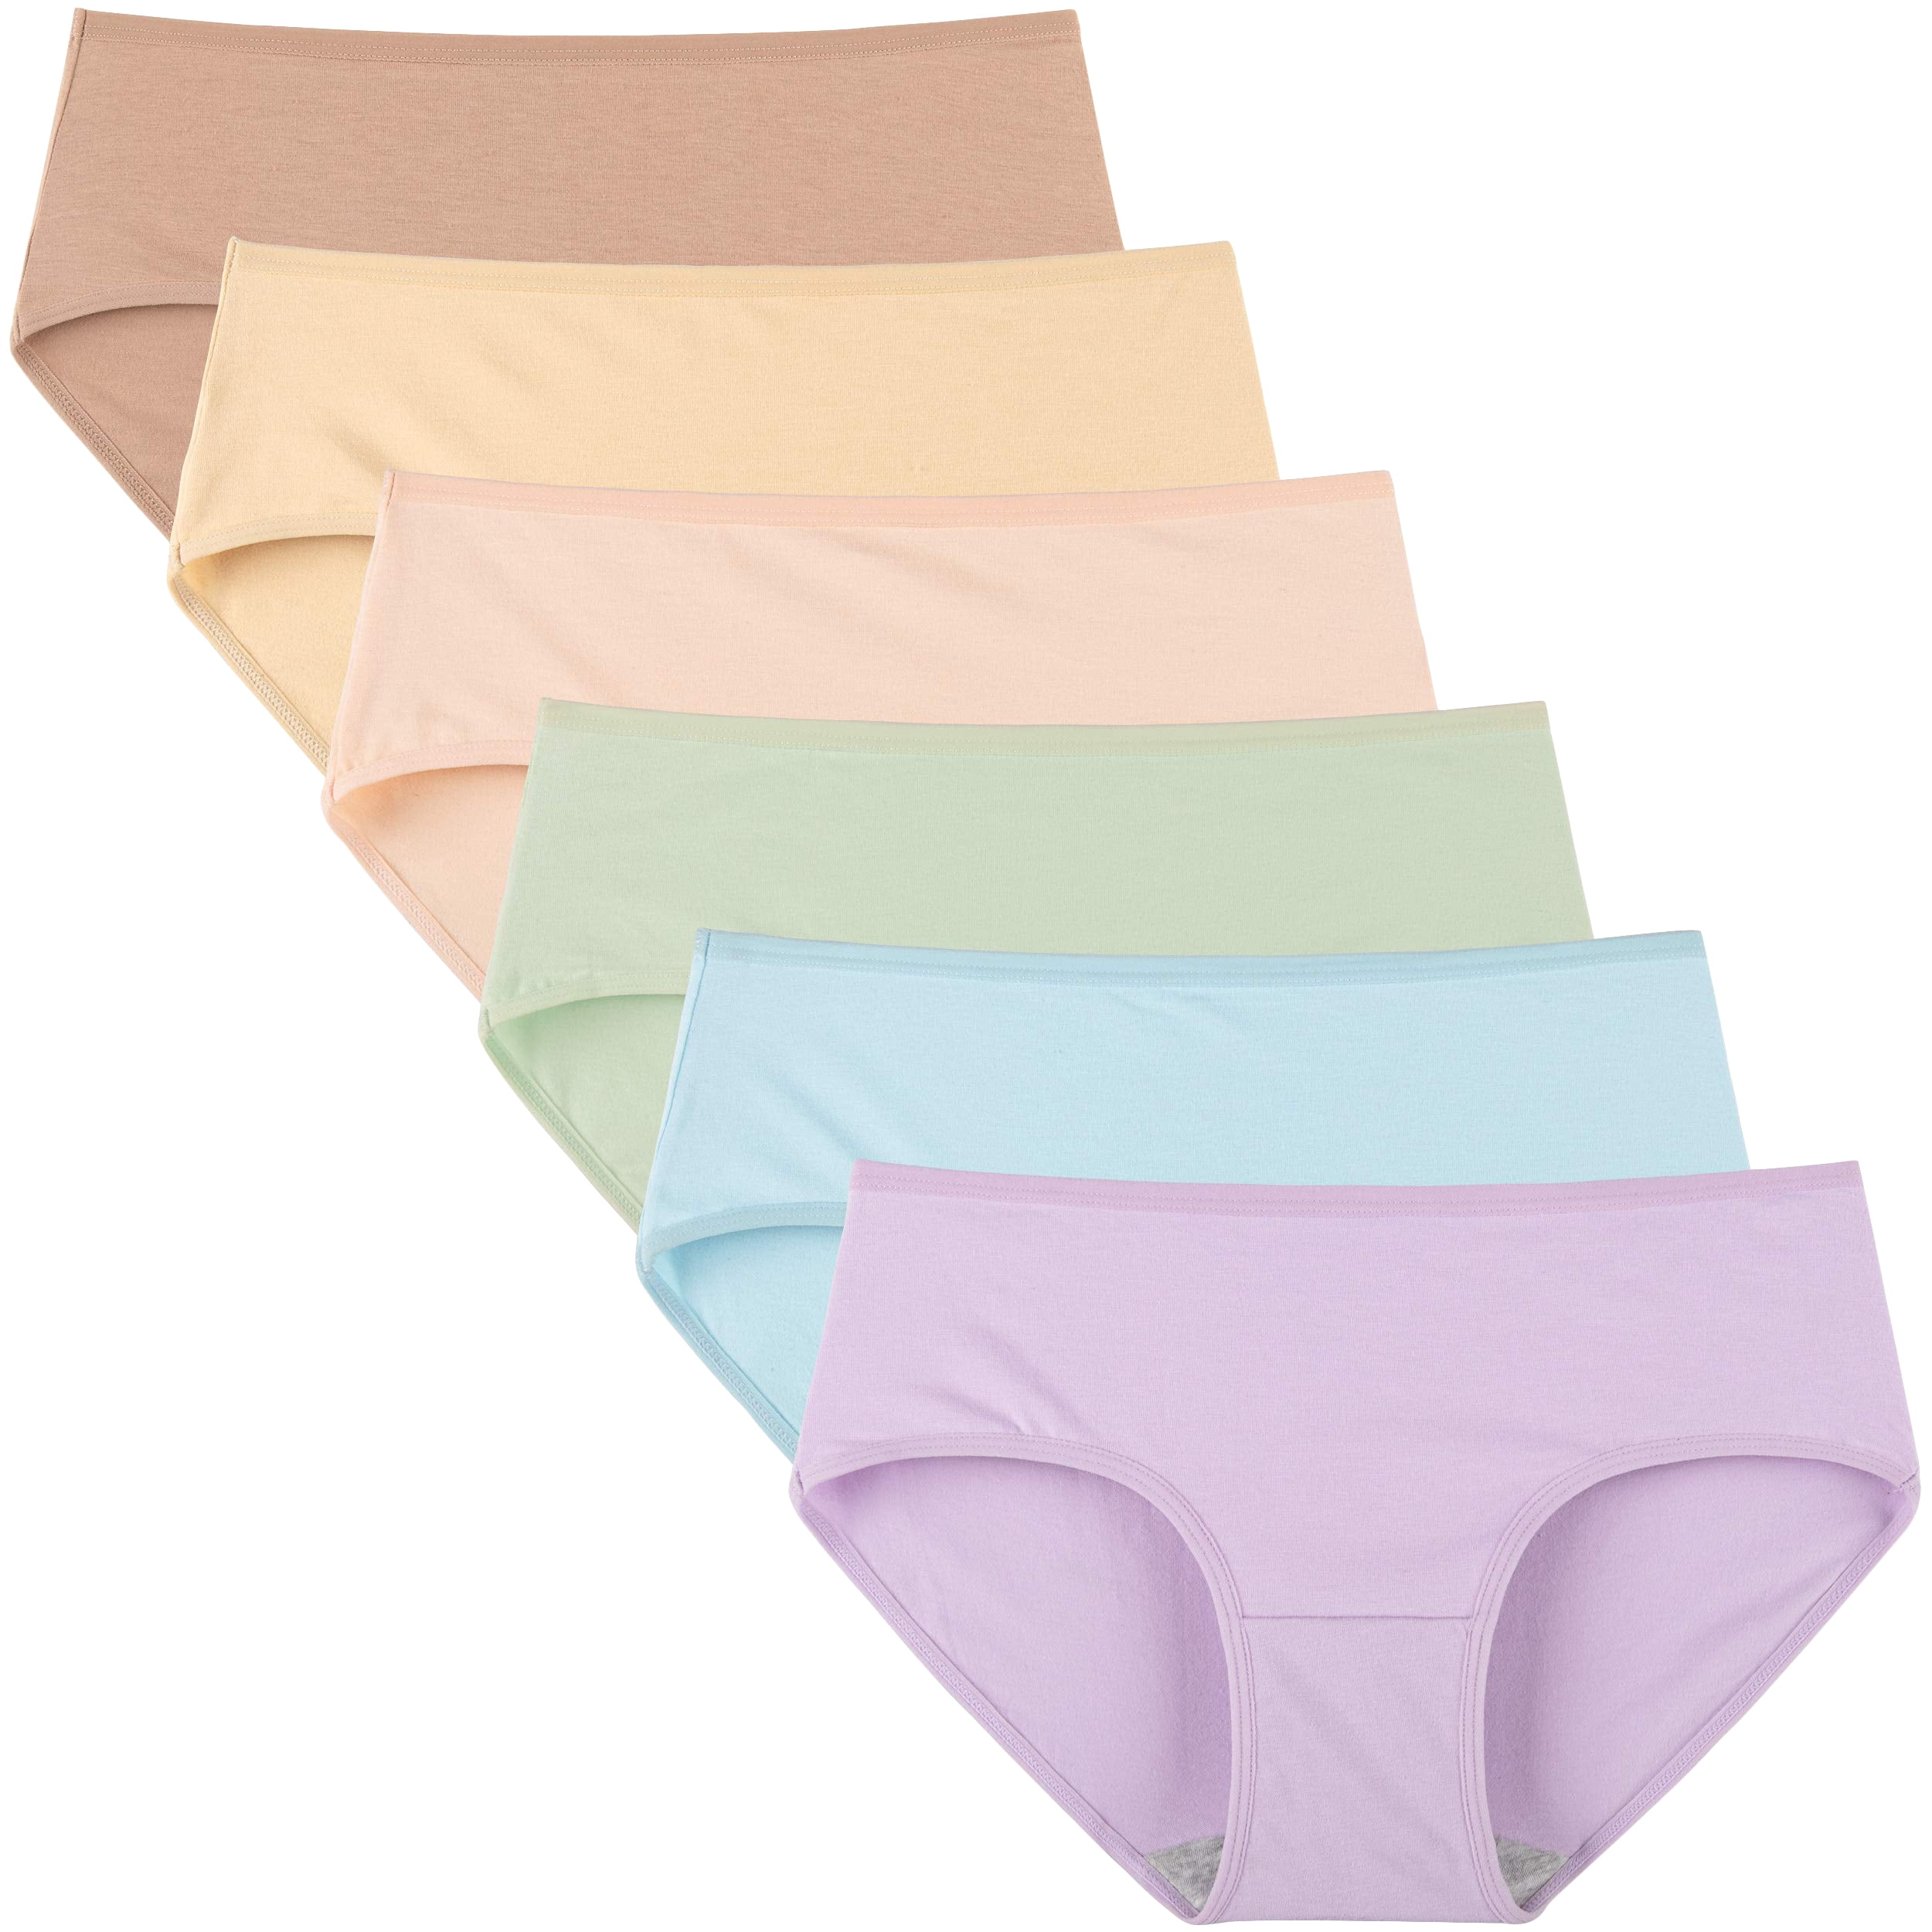 INNERSY Womens Underwear Packs Cotton Hipster Panties Mid/Low Rise 6-Pack  (L, Bright)